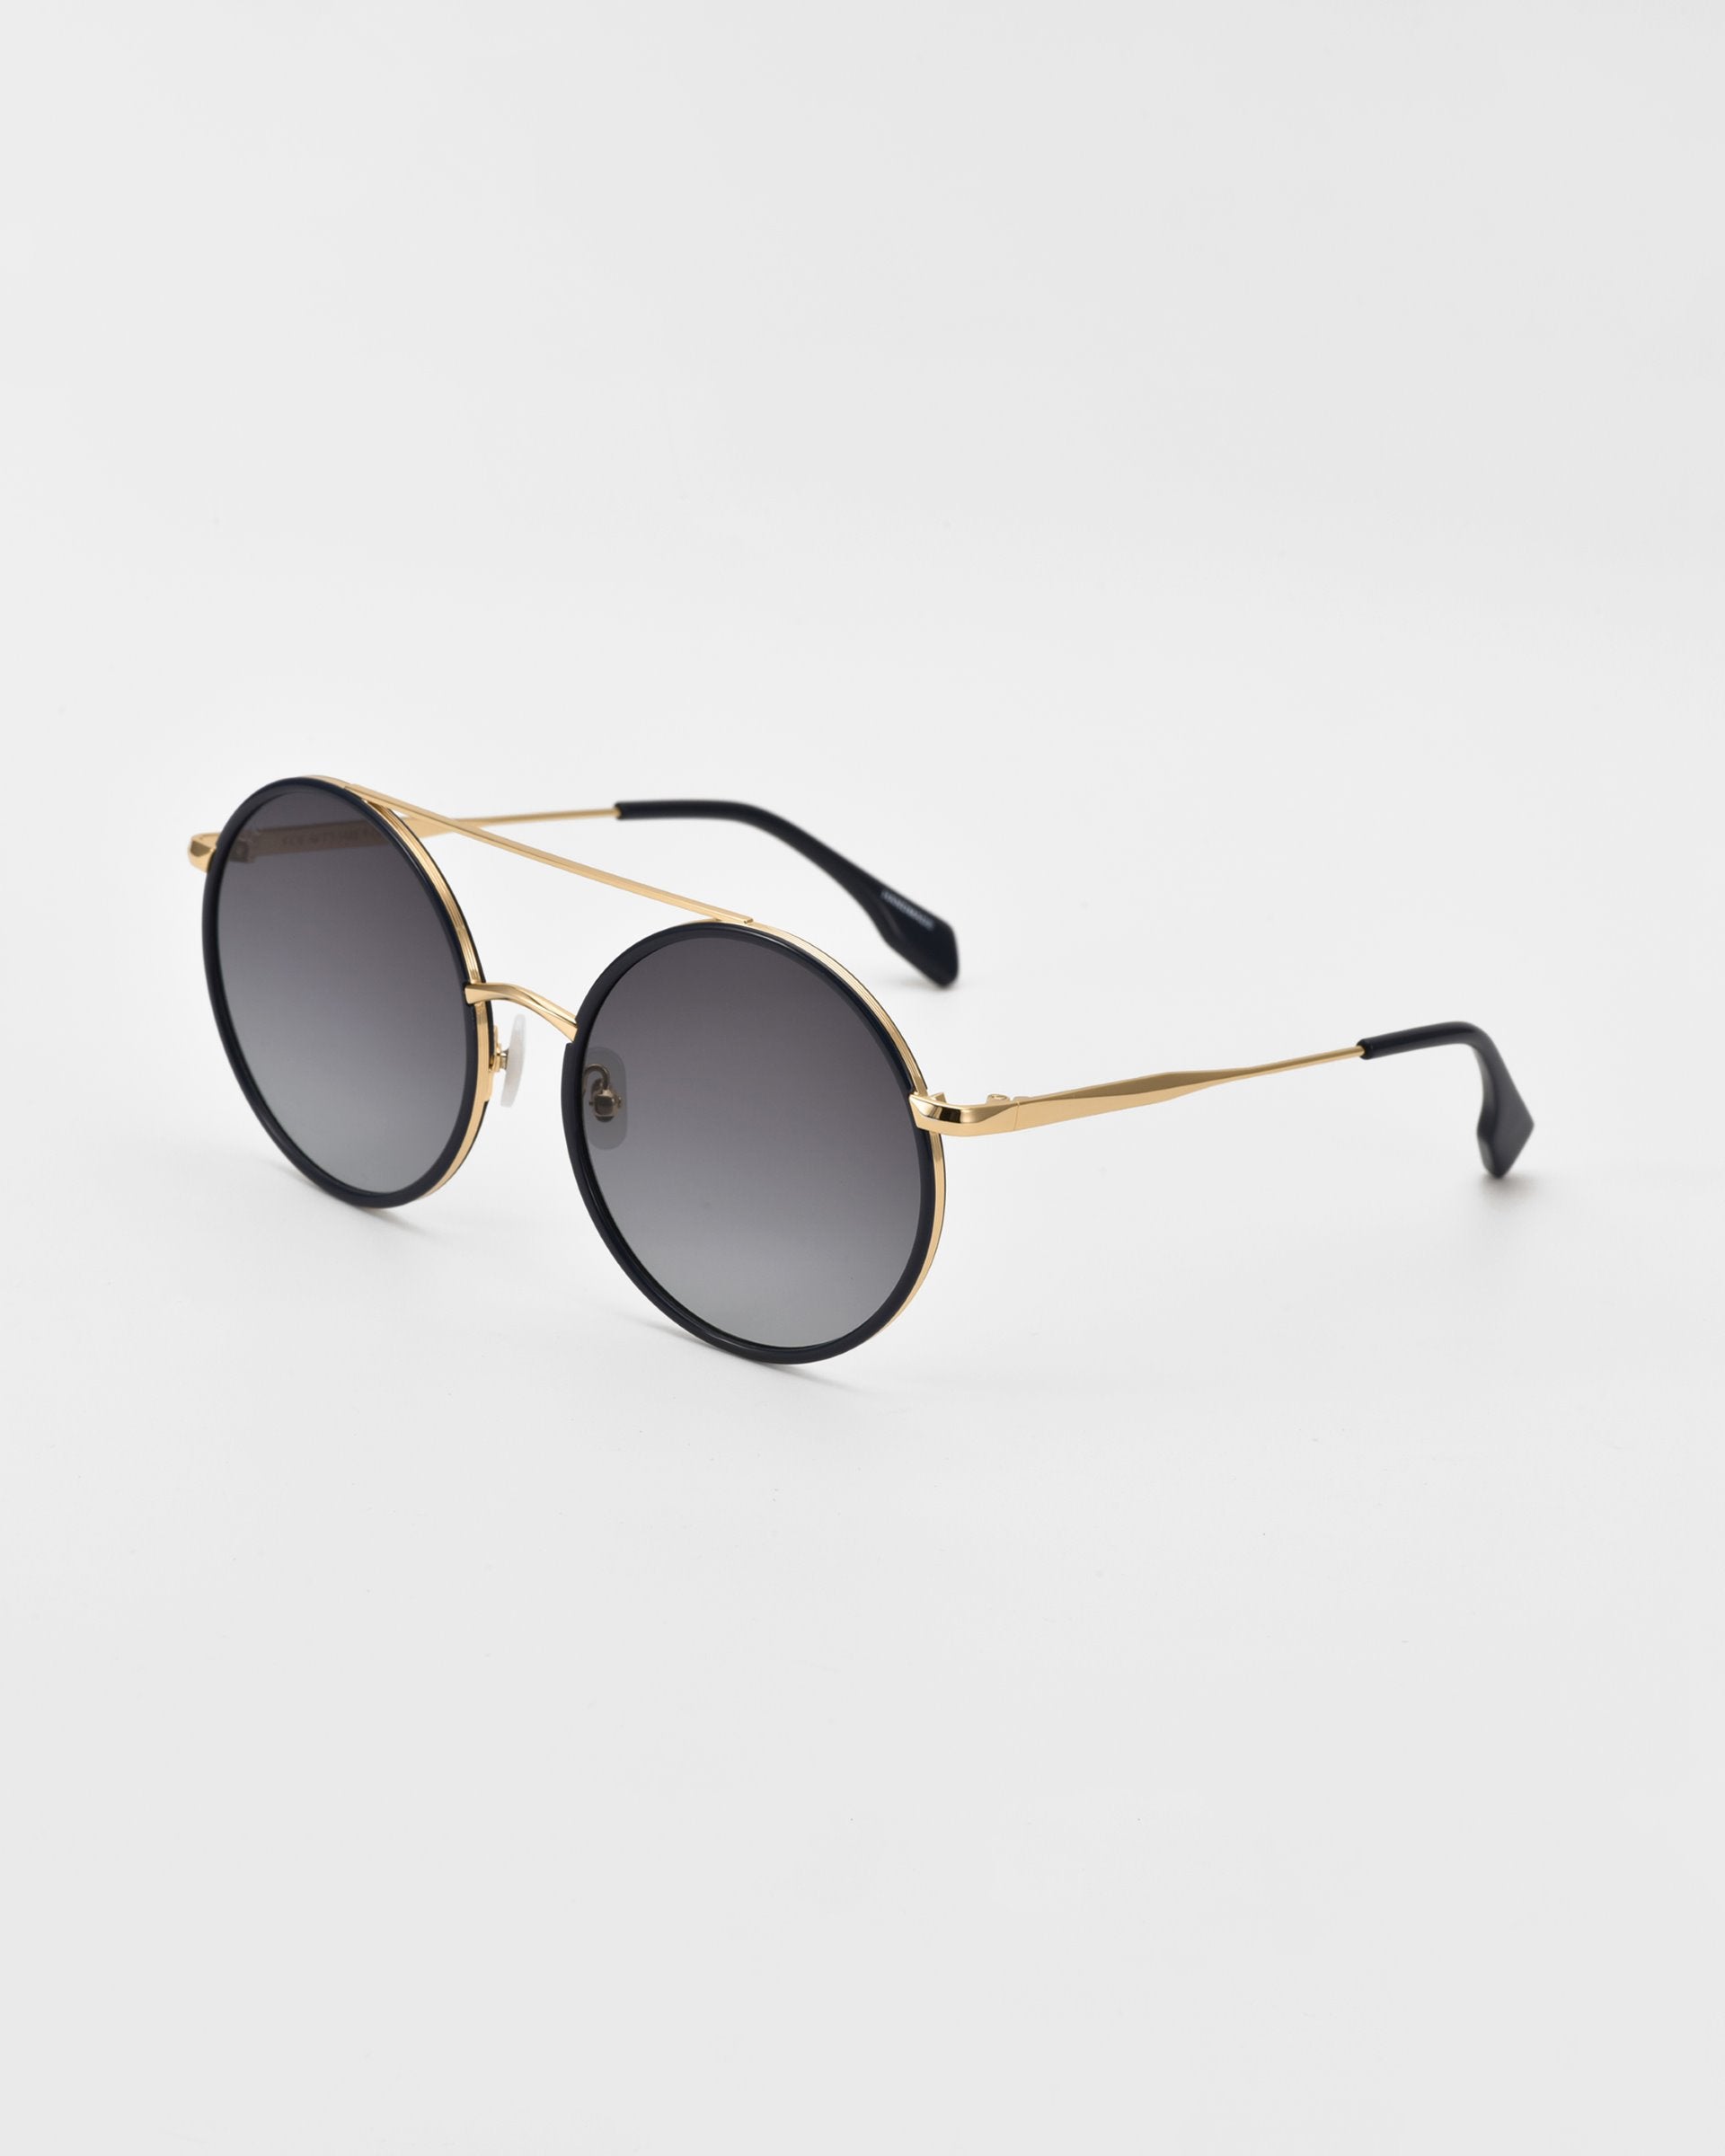 A pair of oversized round aviator sunglasses with black lenses and thin gold-colored frames. The temples feature black ear pieces, and the jade-stone nose pads enhance comfort. The plain white background accentuates the sleek design of these chic Orb sunglasses by For Art&#39;s Sake®.